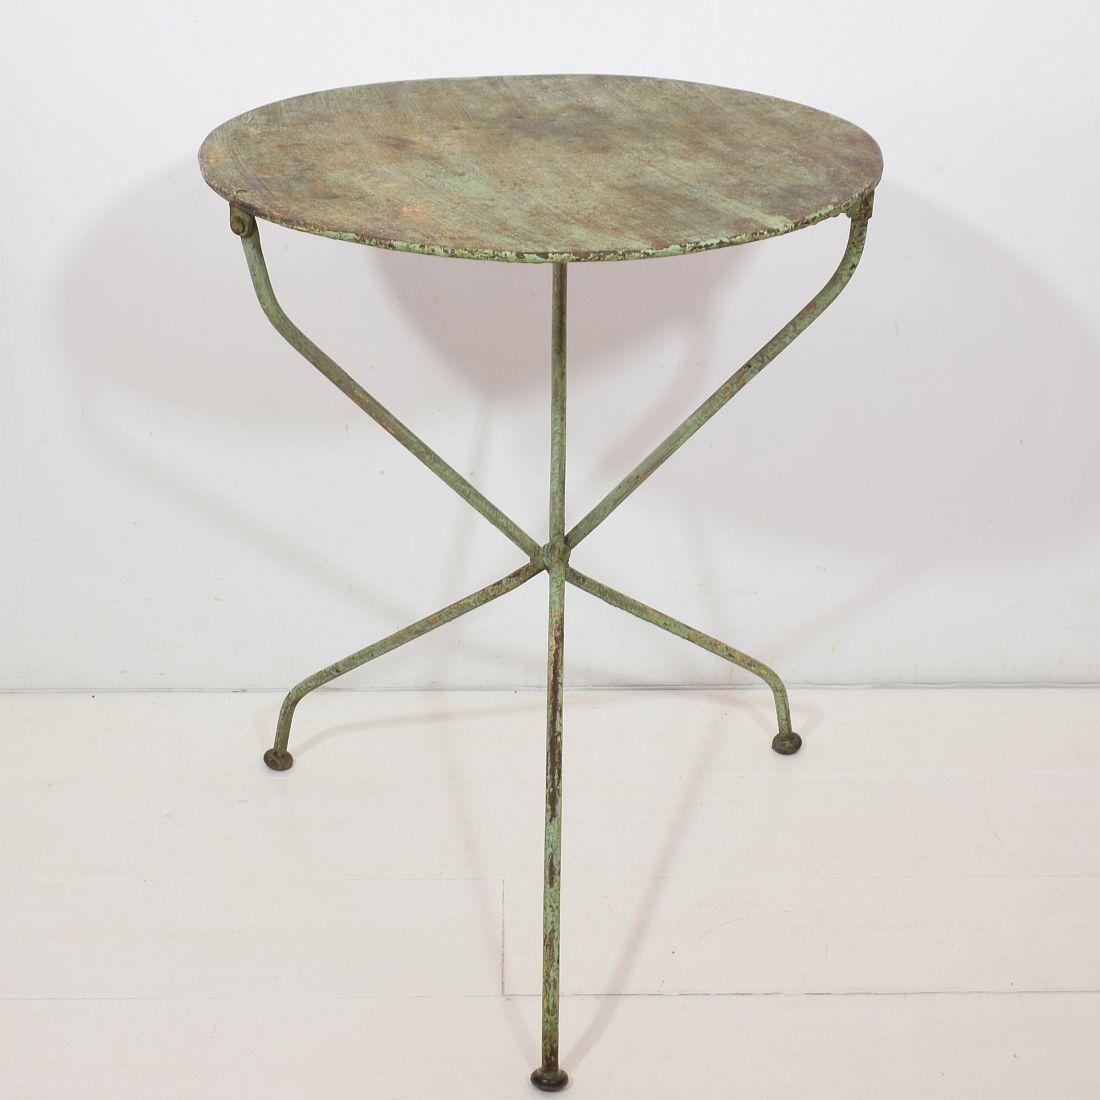 Painted 19th Century French Iron Bistro Folding Table